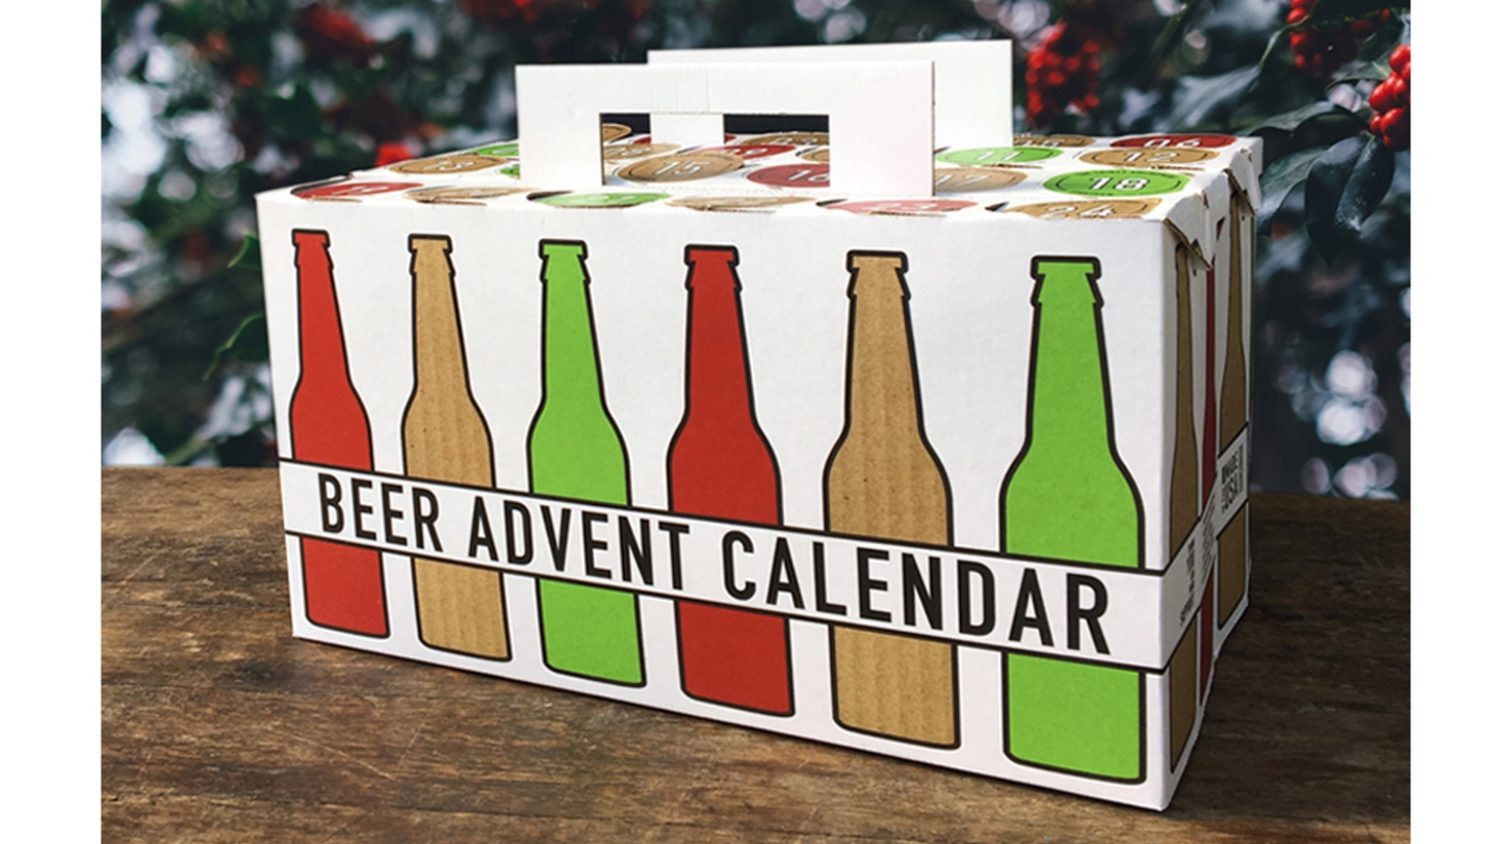 Count Down The Days 'Til Christmas With A Beer Advent Calendar